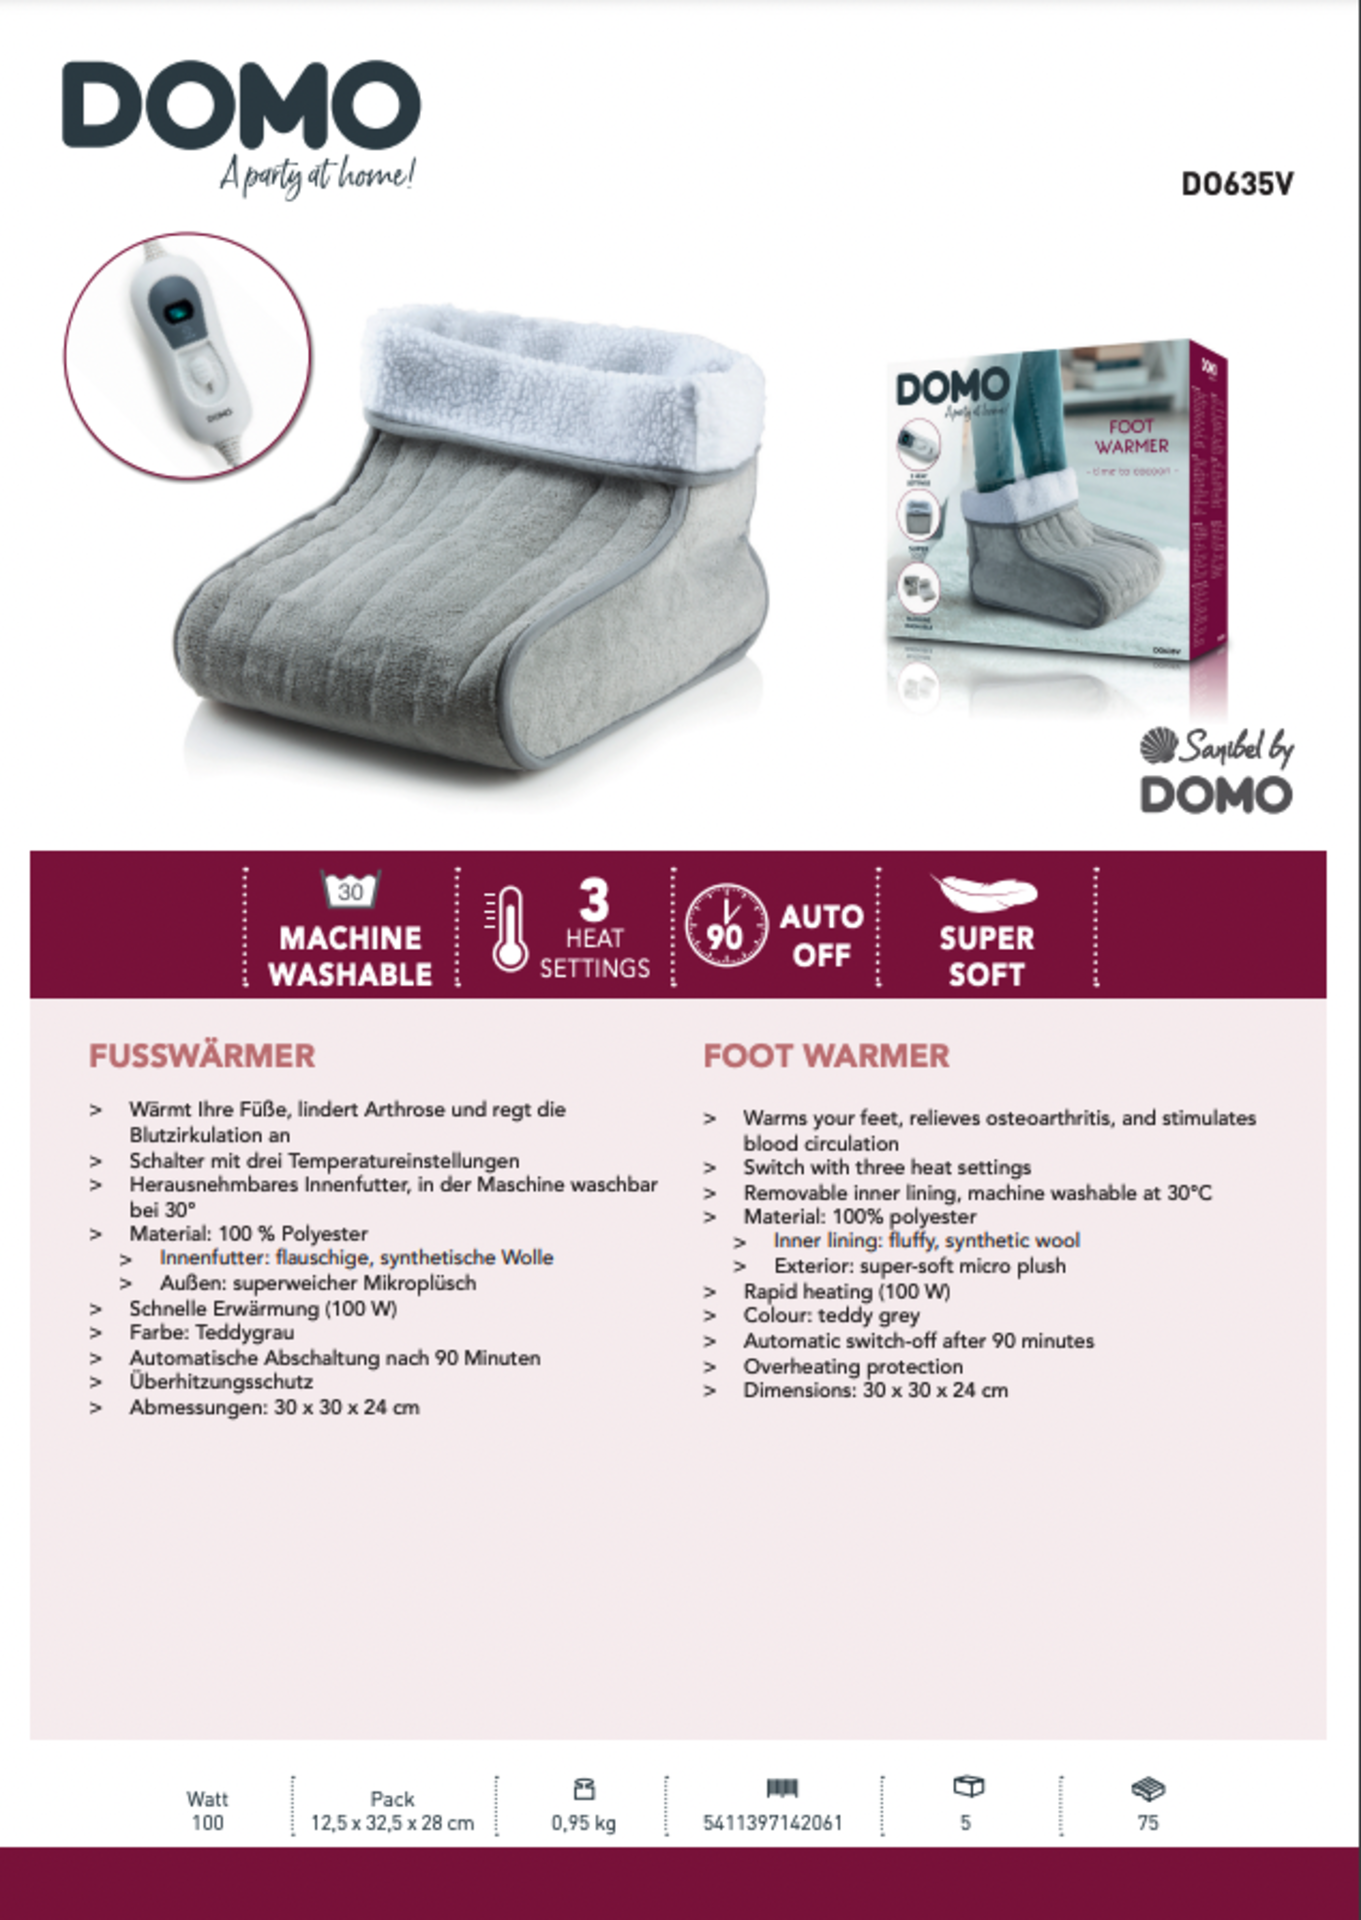 10 x DOMO Twin Super Soft Foot Farmers RRP £ 50 each - Image 2 of 2